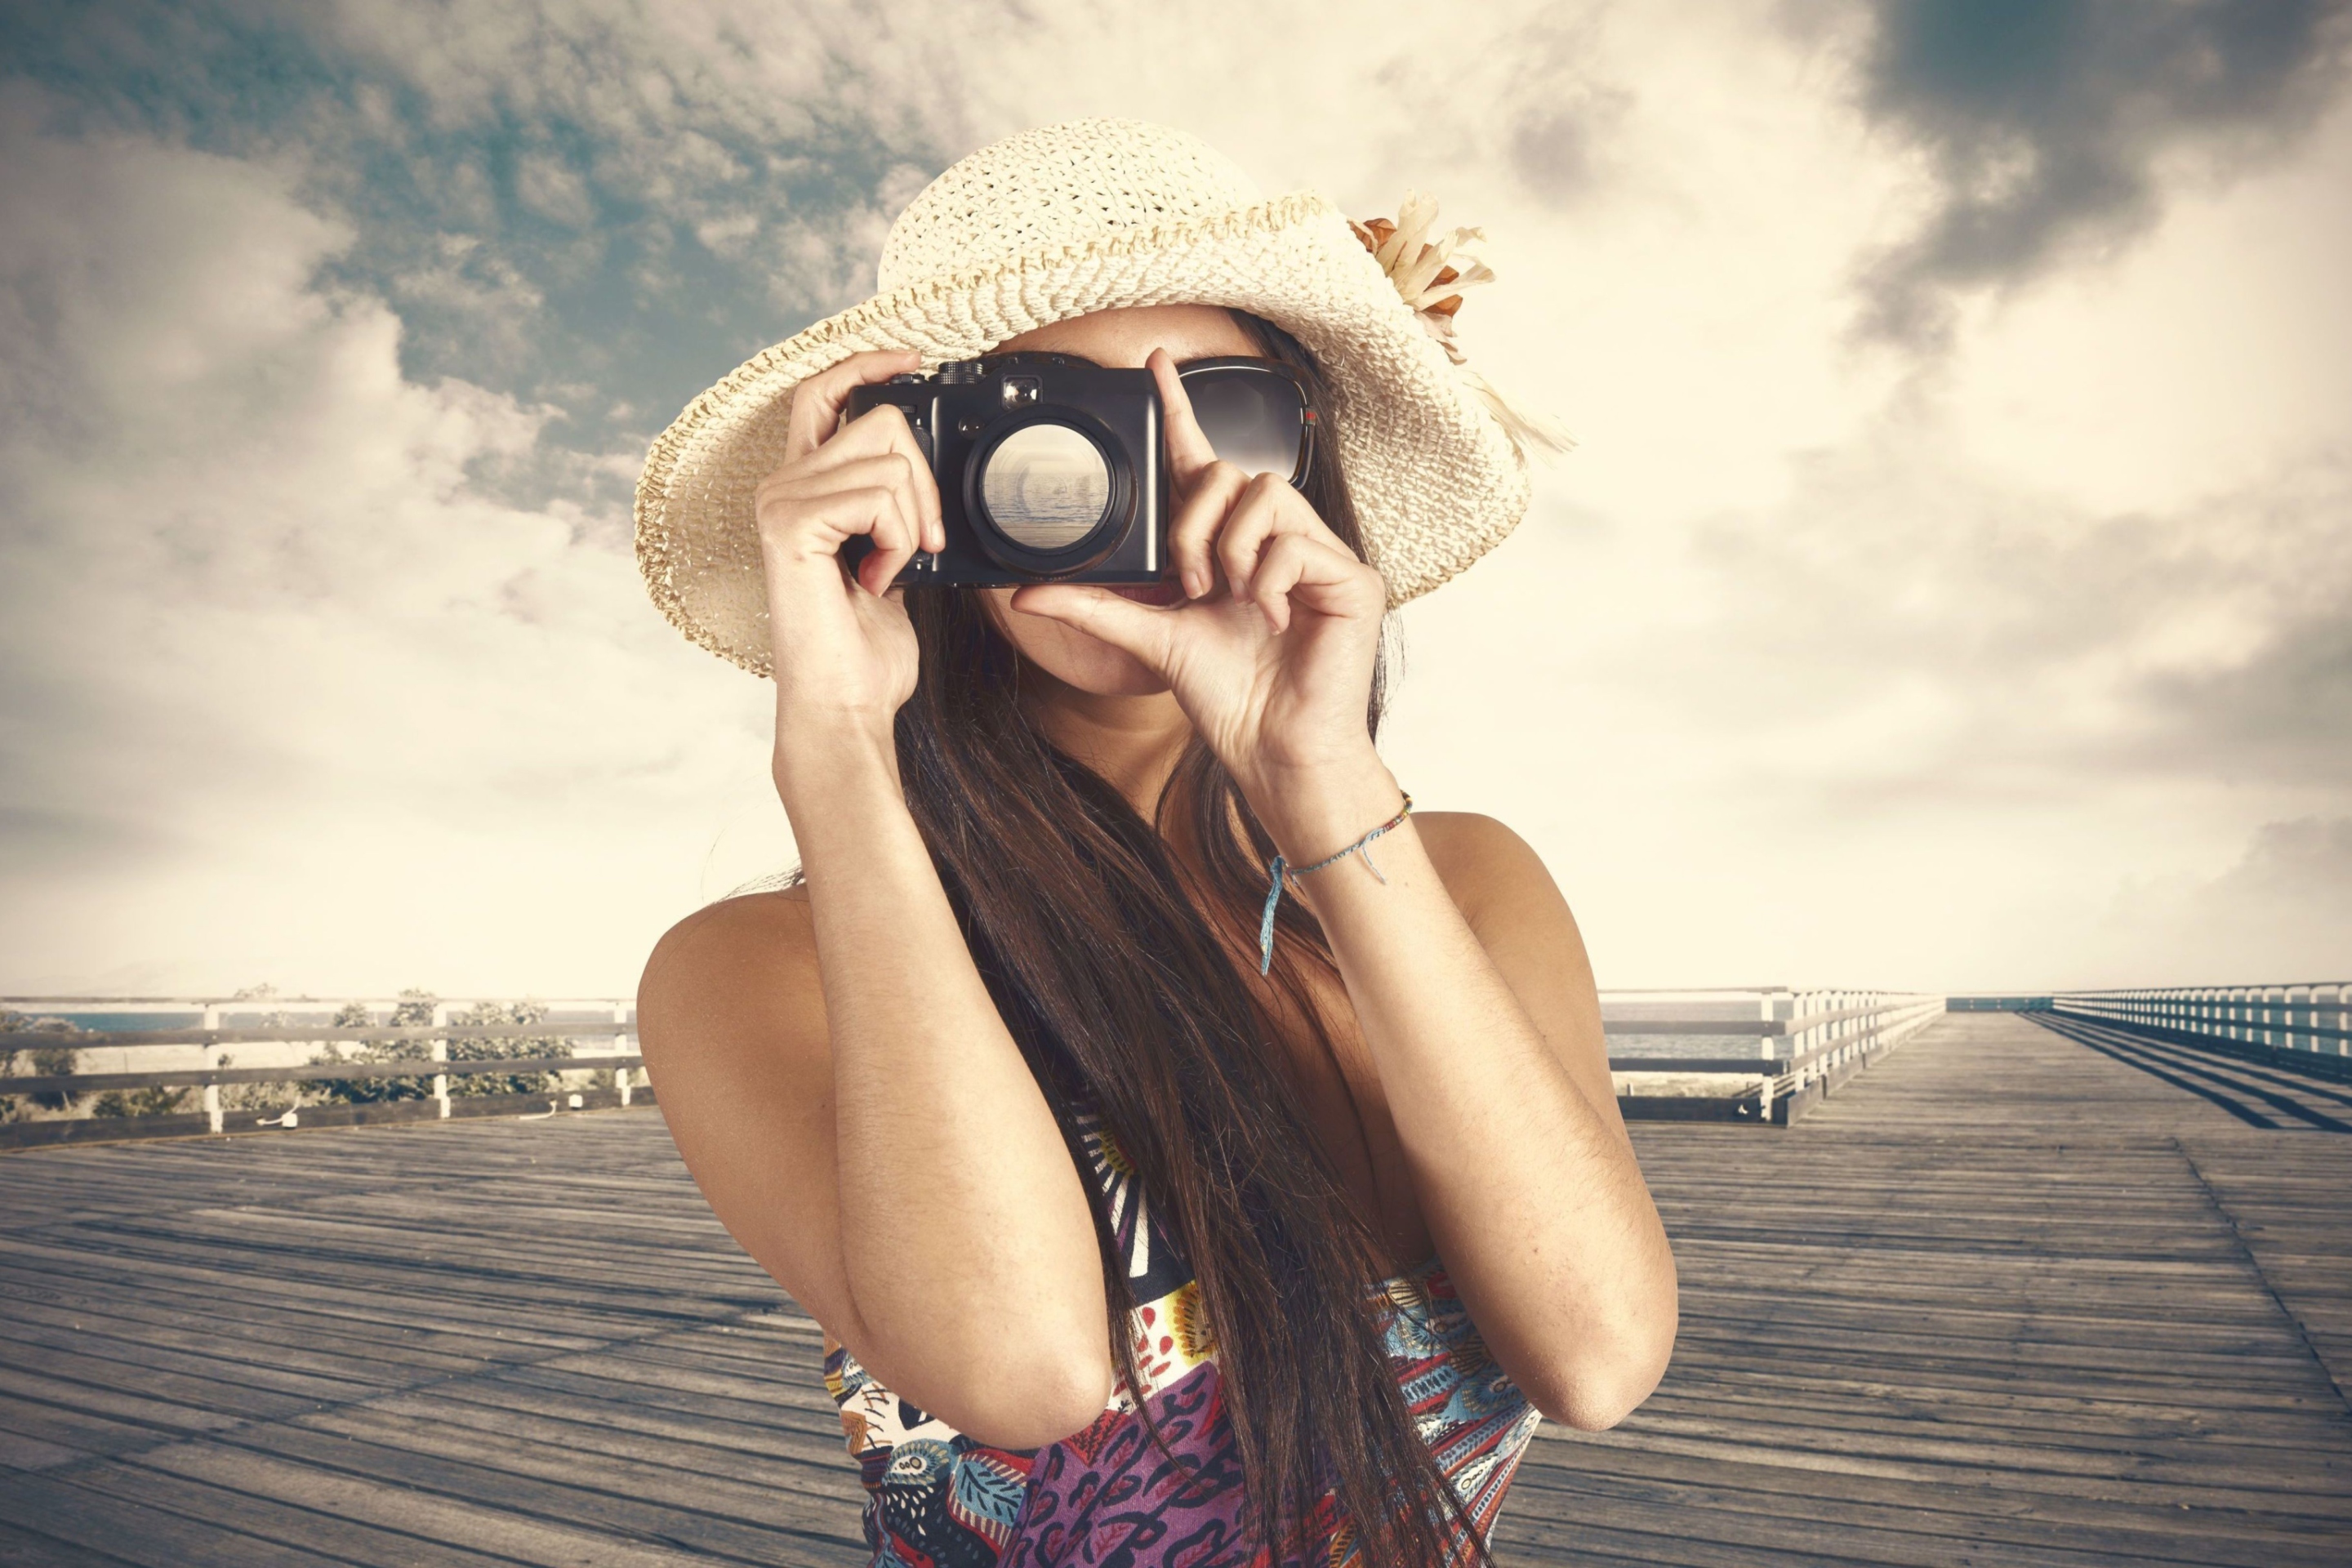 Cute Photographer In Straw Hat wallpaper 2880x1920